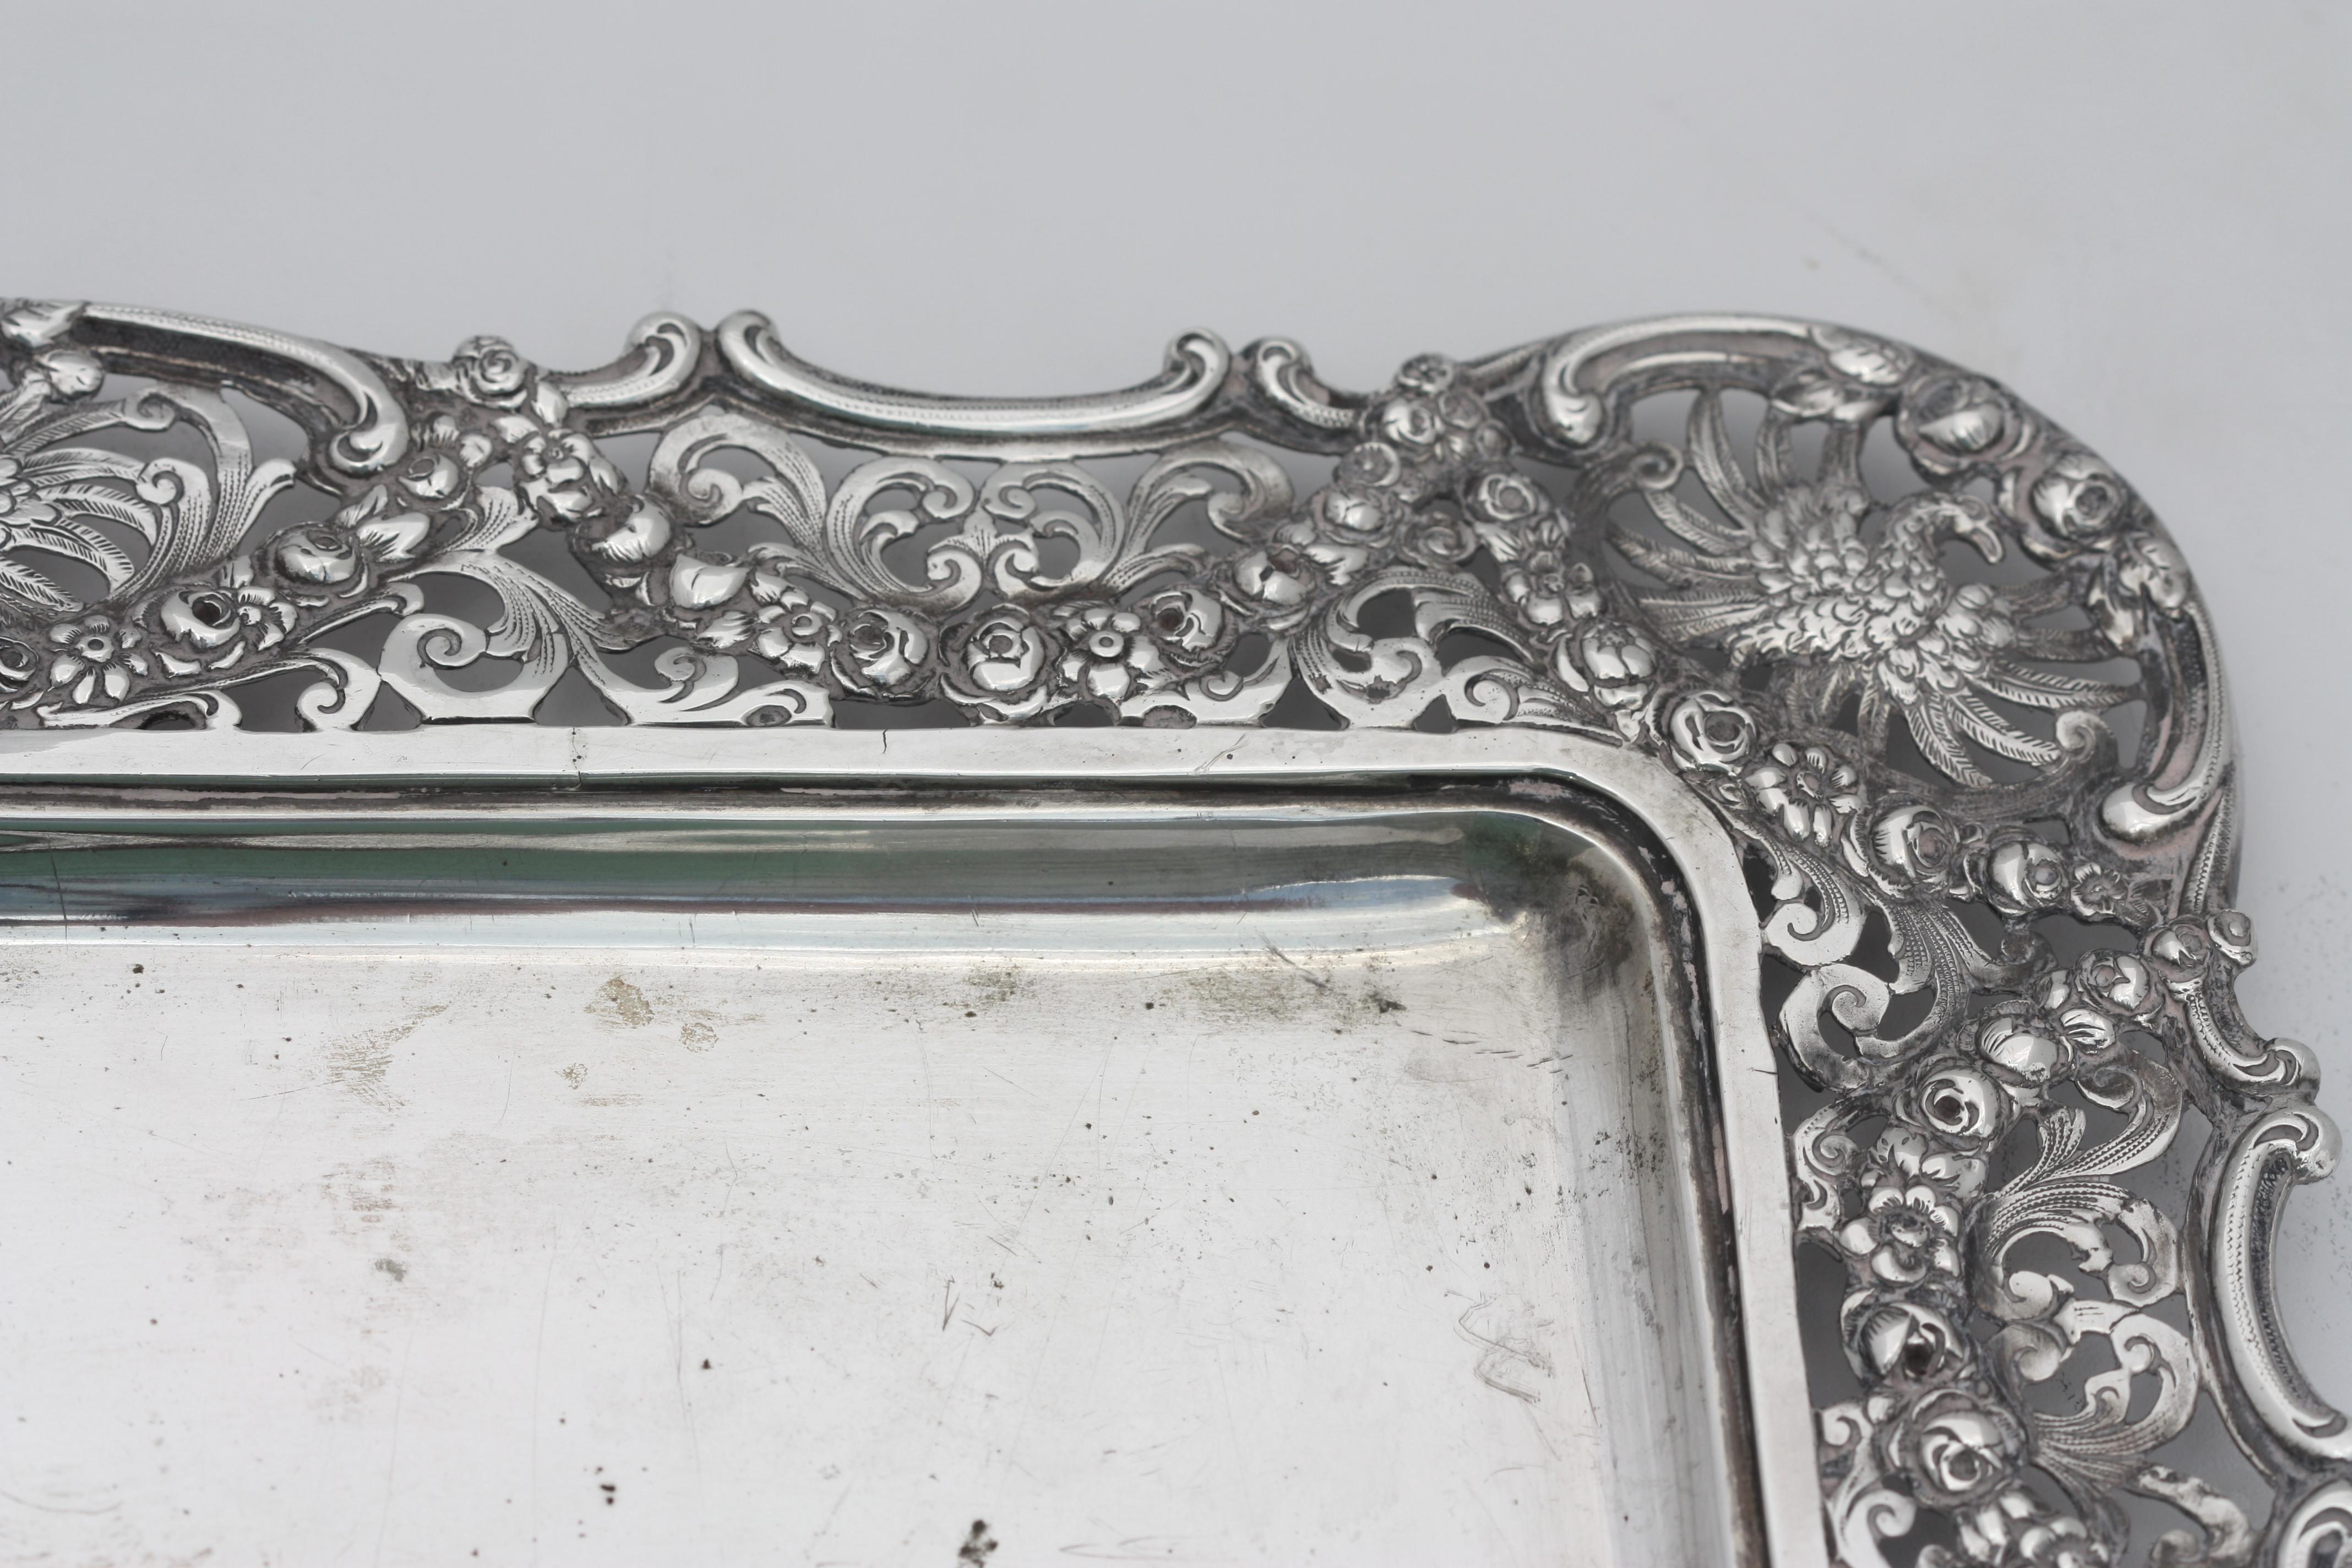  Continental Silver Rectangular Tray, Probably German For Sale 3